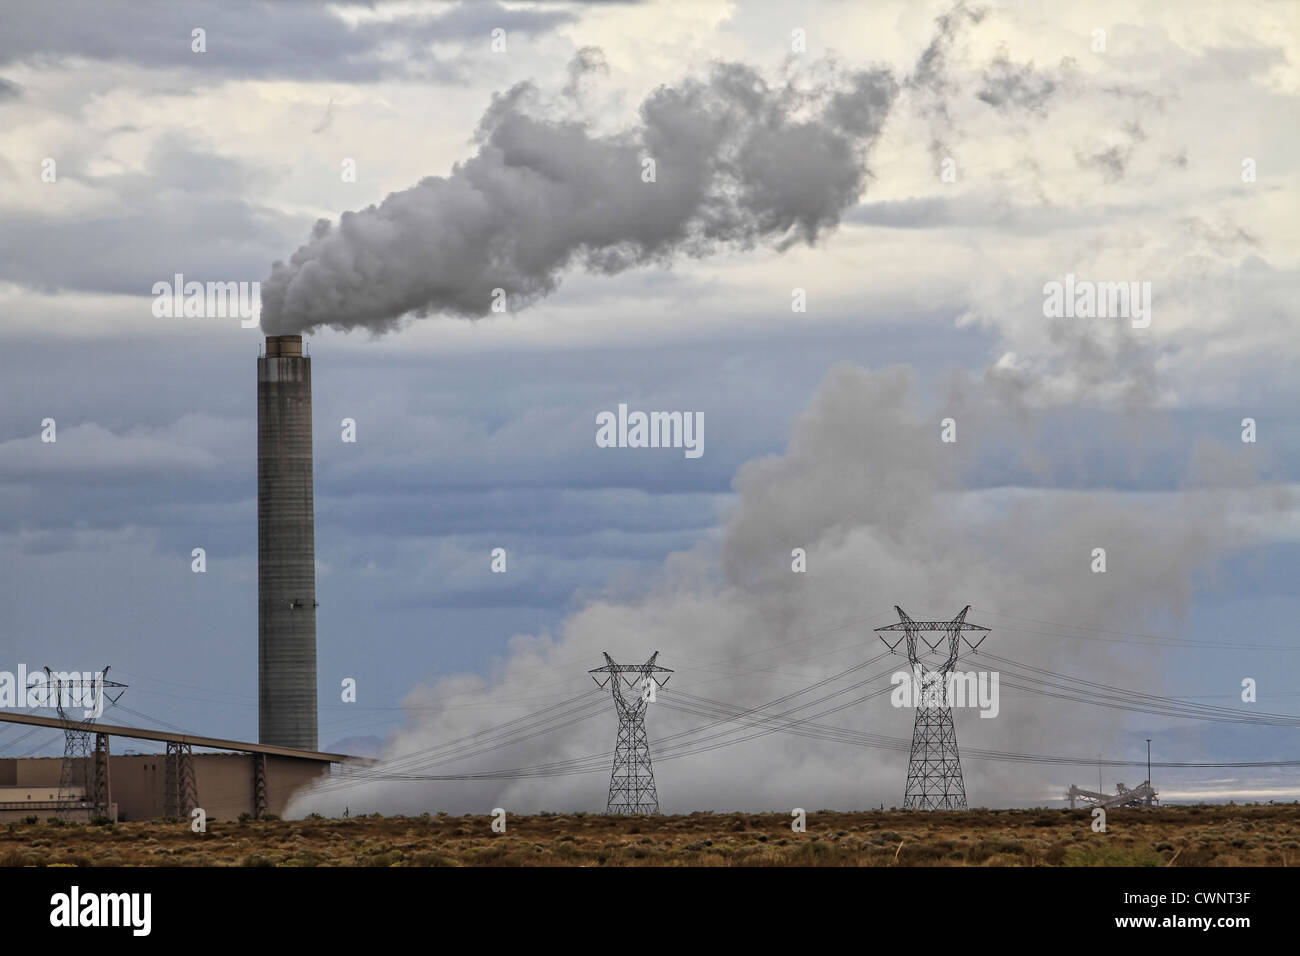 A smokestack spewing out pollutants while a power plant produces electricity.  Power lines and poles surround the plant. Stock Photo